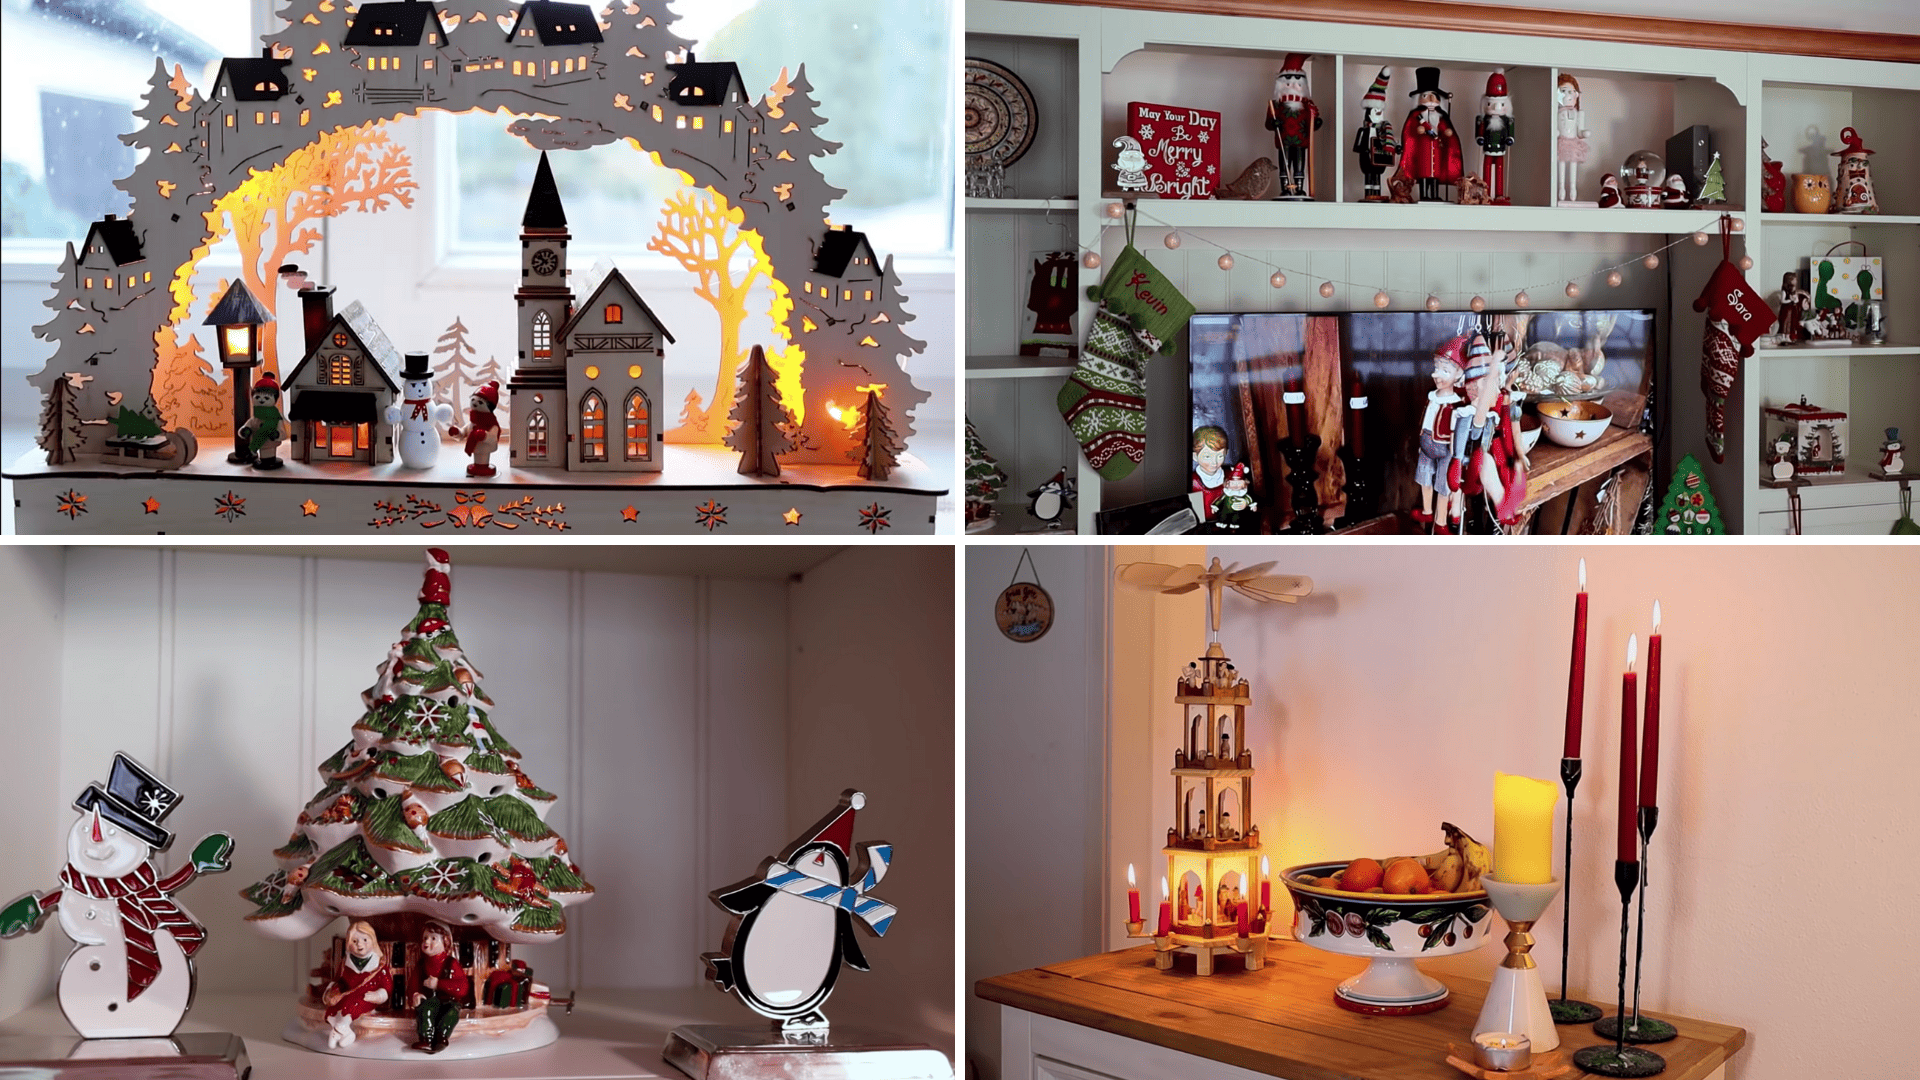 German Christmas Decorations We’ve Never Had Before | My Merry Messy Life